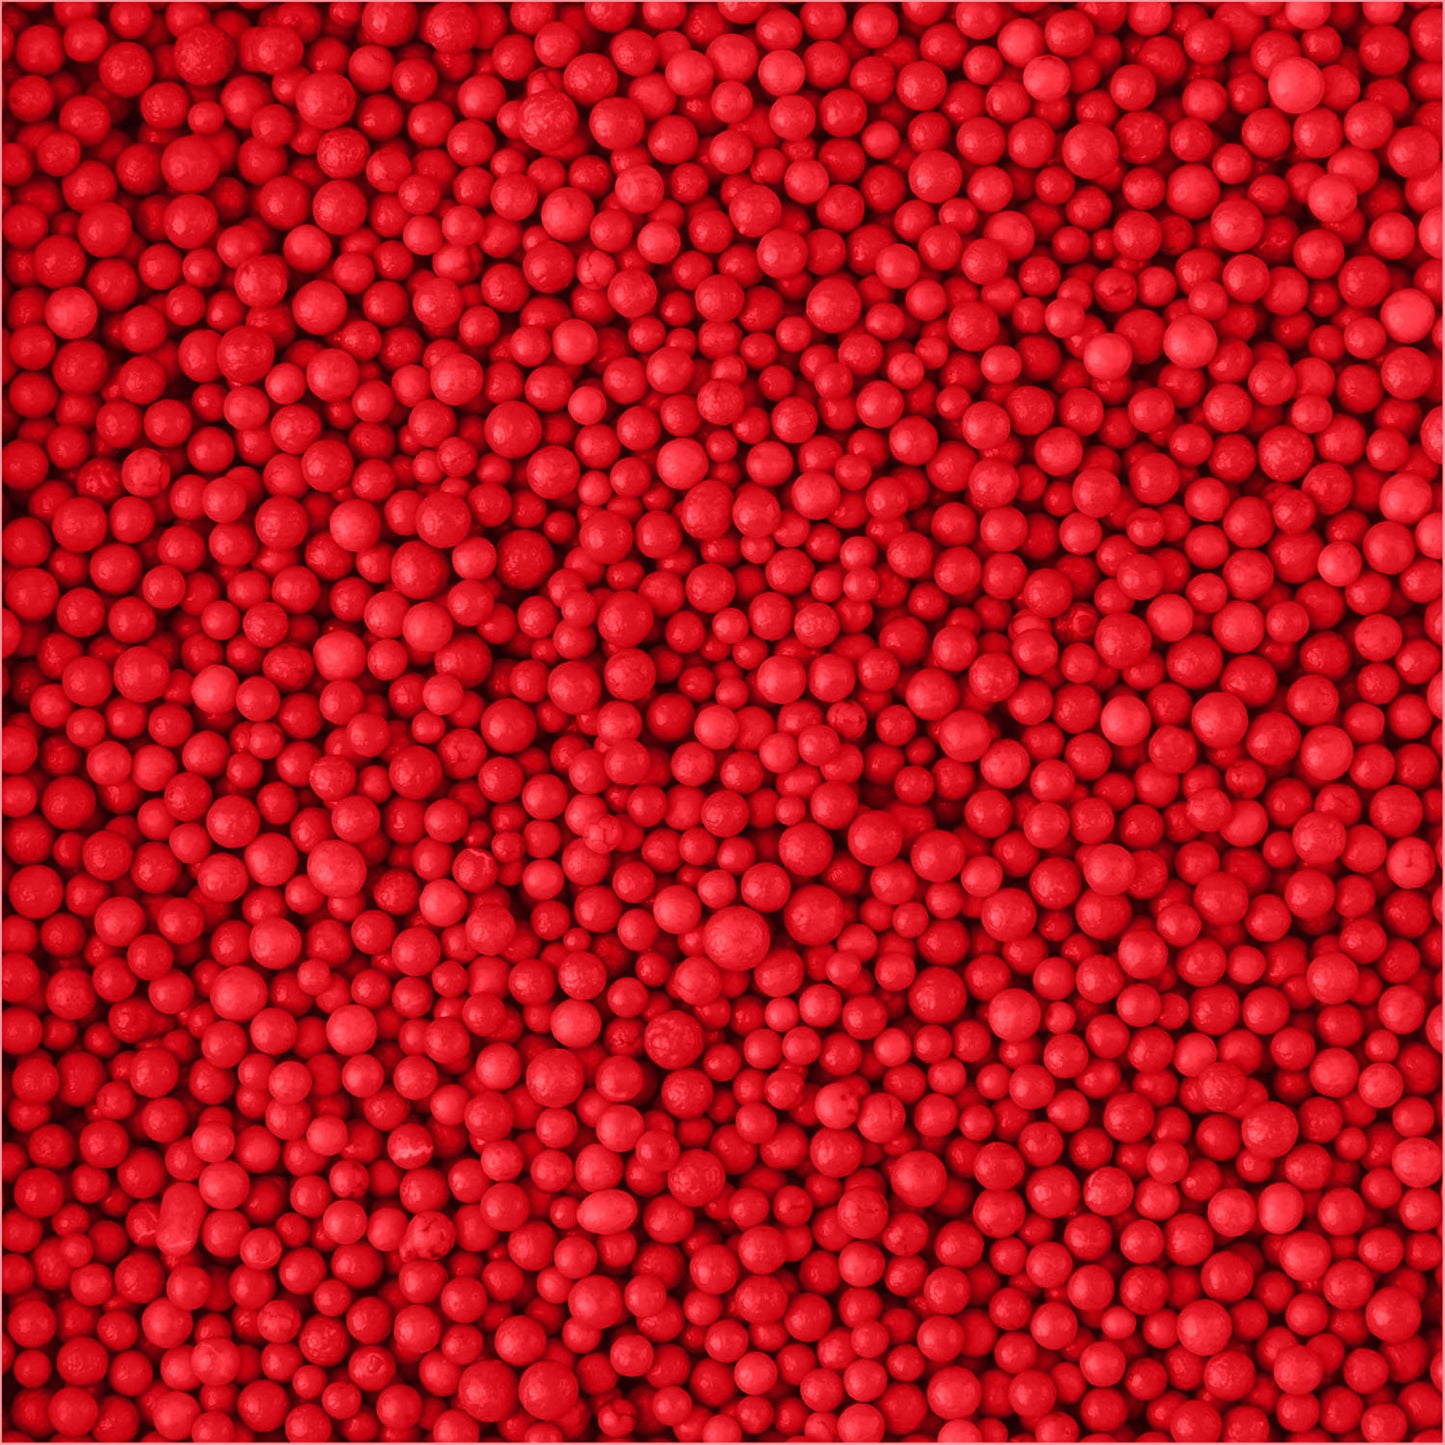 AC Food Crafting Bulk Polished Nonpariel Sprinkles 25lbs-Bright Red